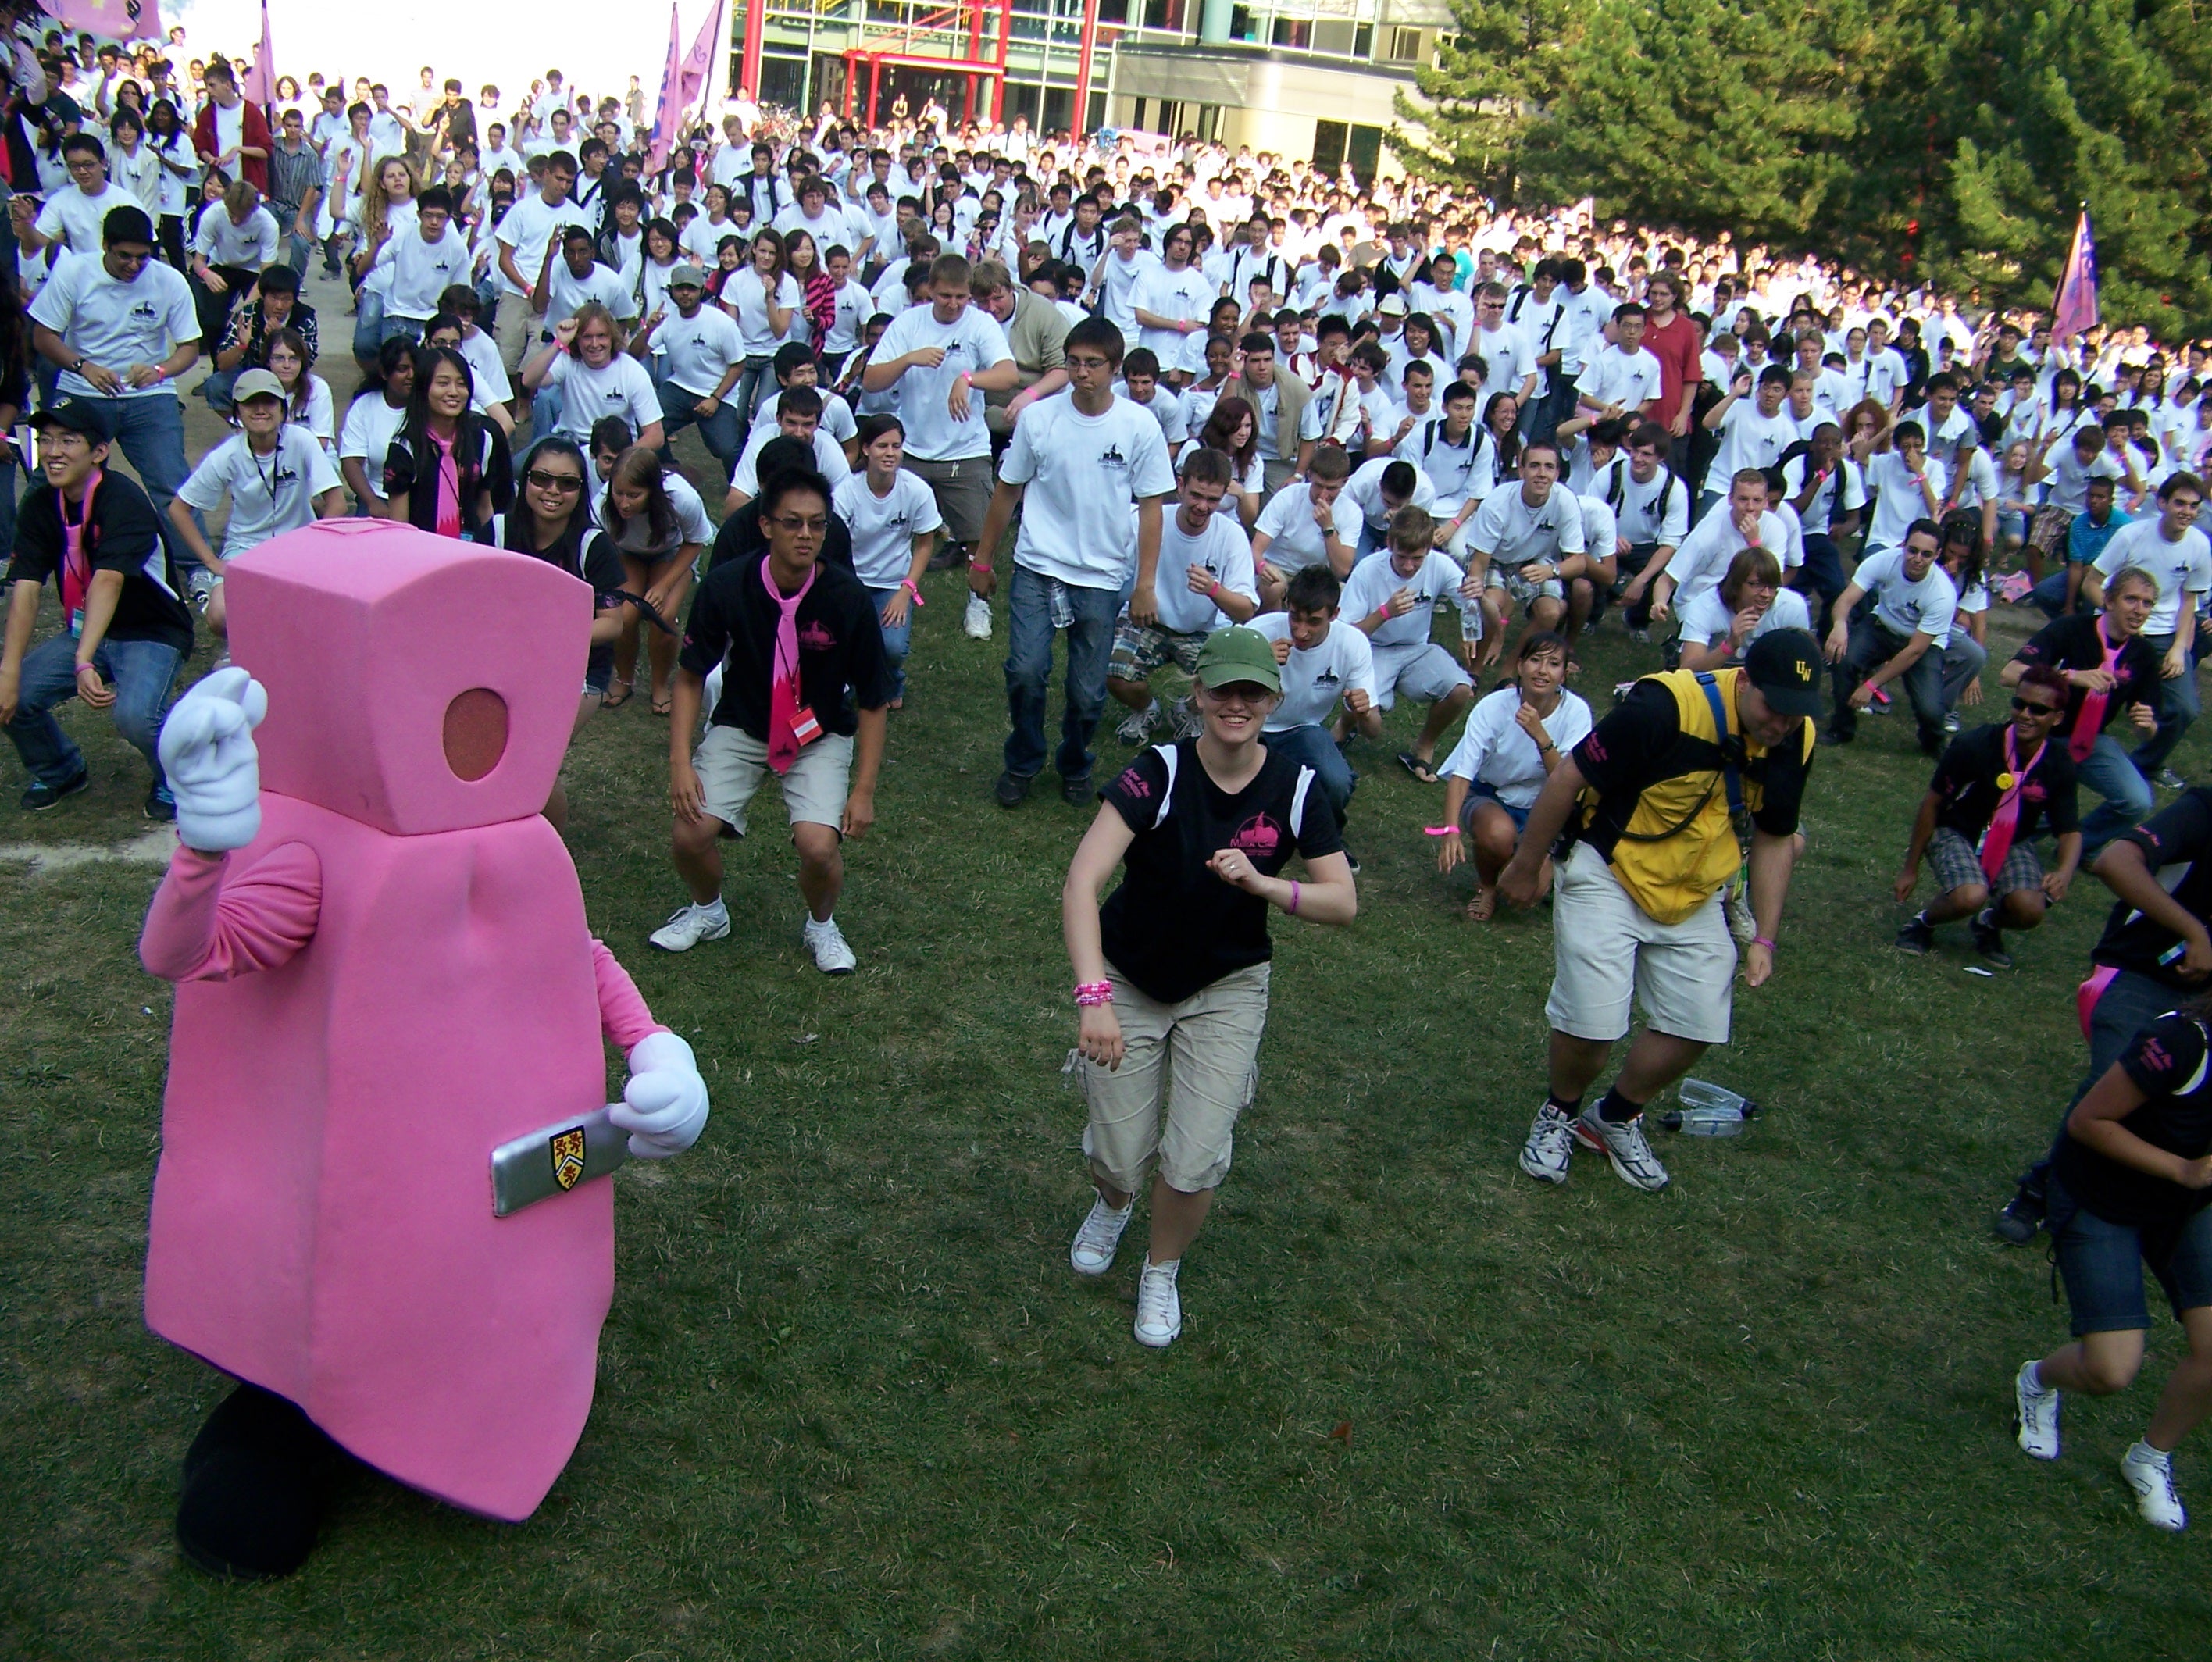 Pinkie the pink tie mascot dances with first year students